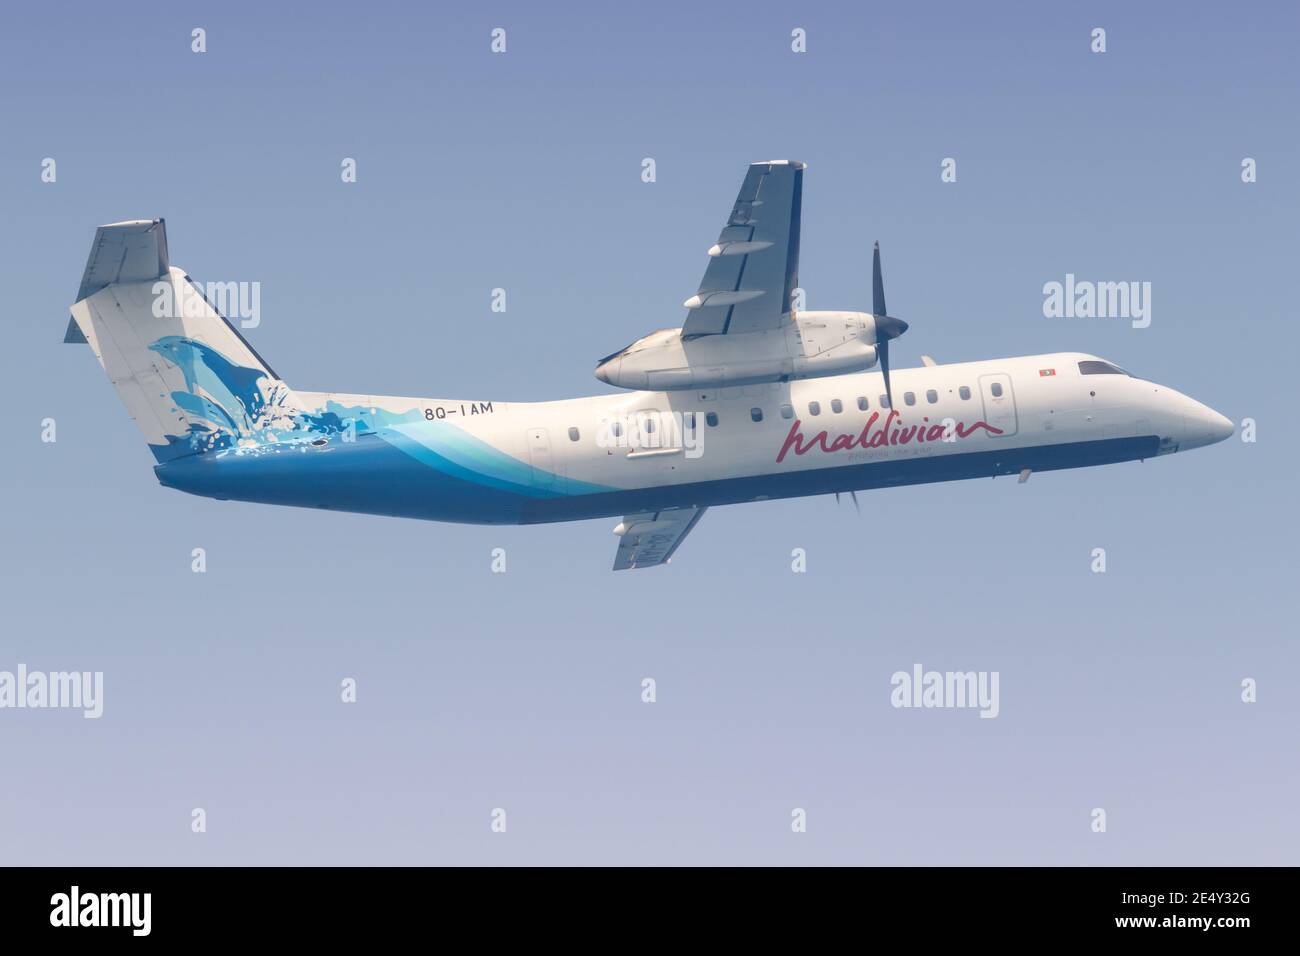 Male, Maldives – February 19, 2018: Maldivian Bombardier DHC-8-300 airplane at Male airport (MLE) in the Maldives. Stock Photo